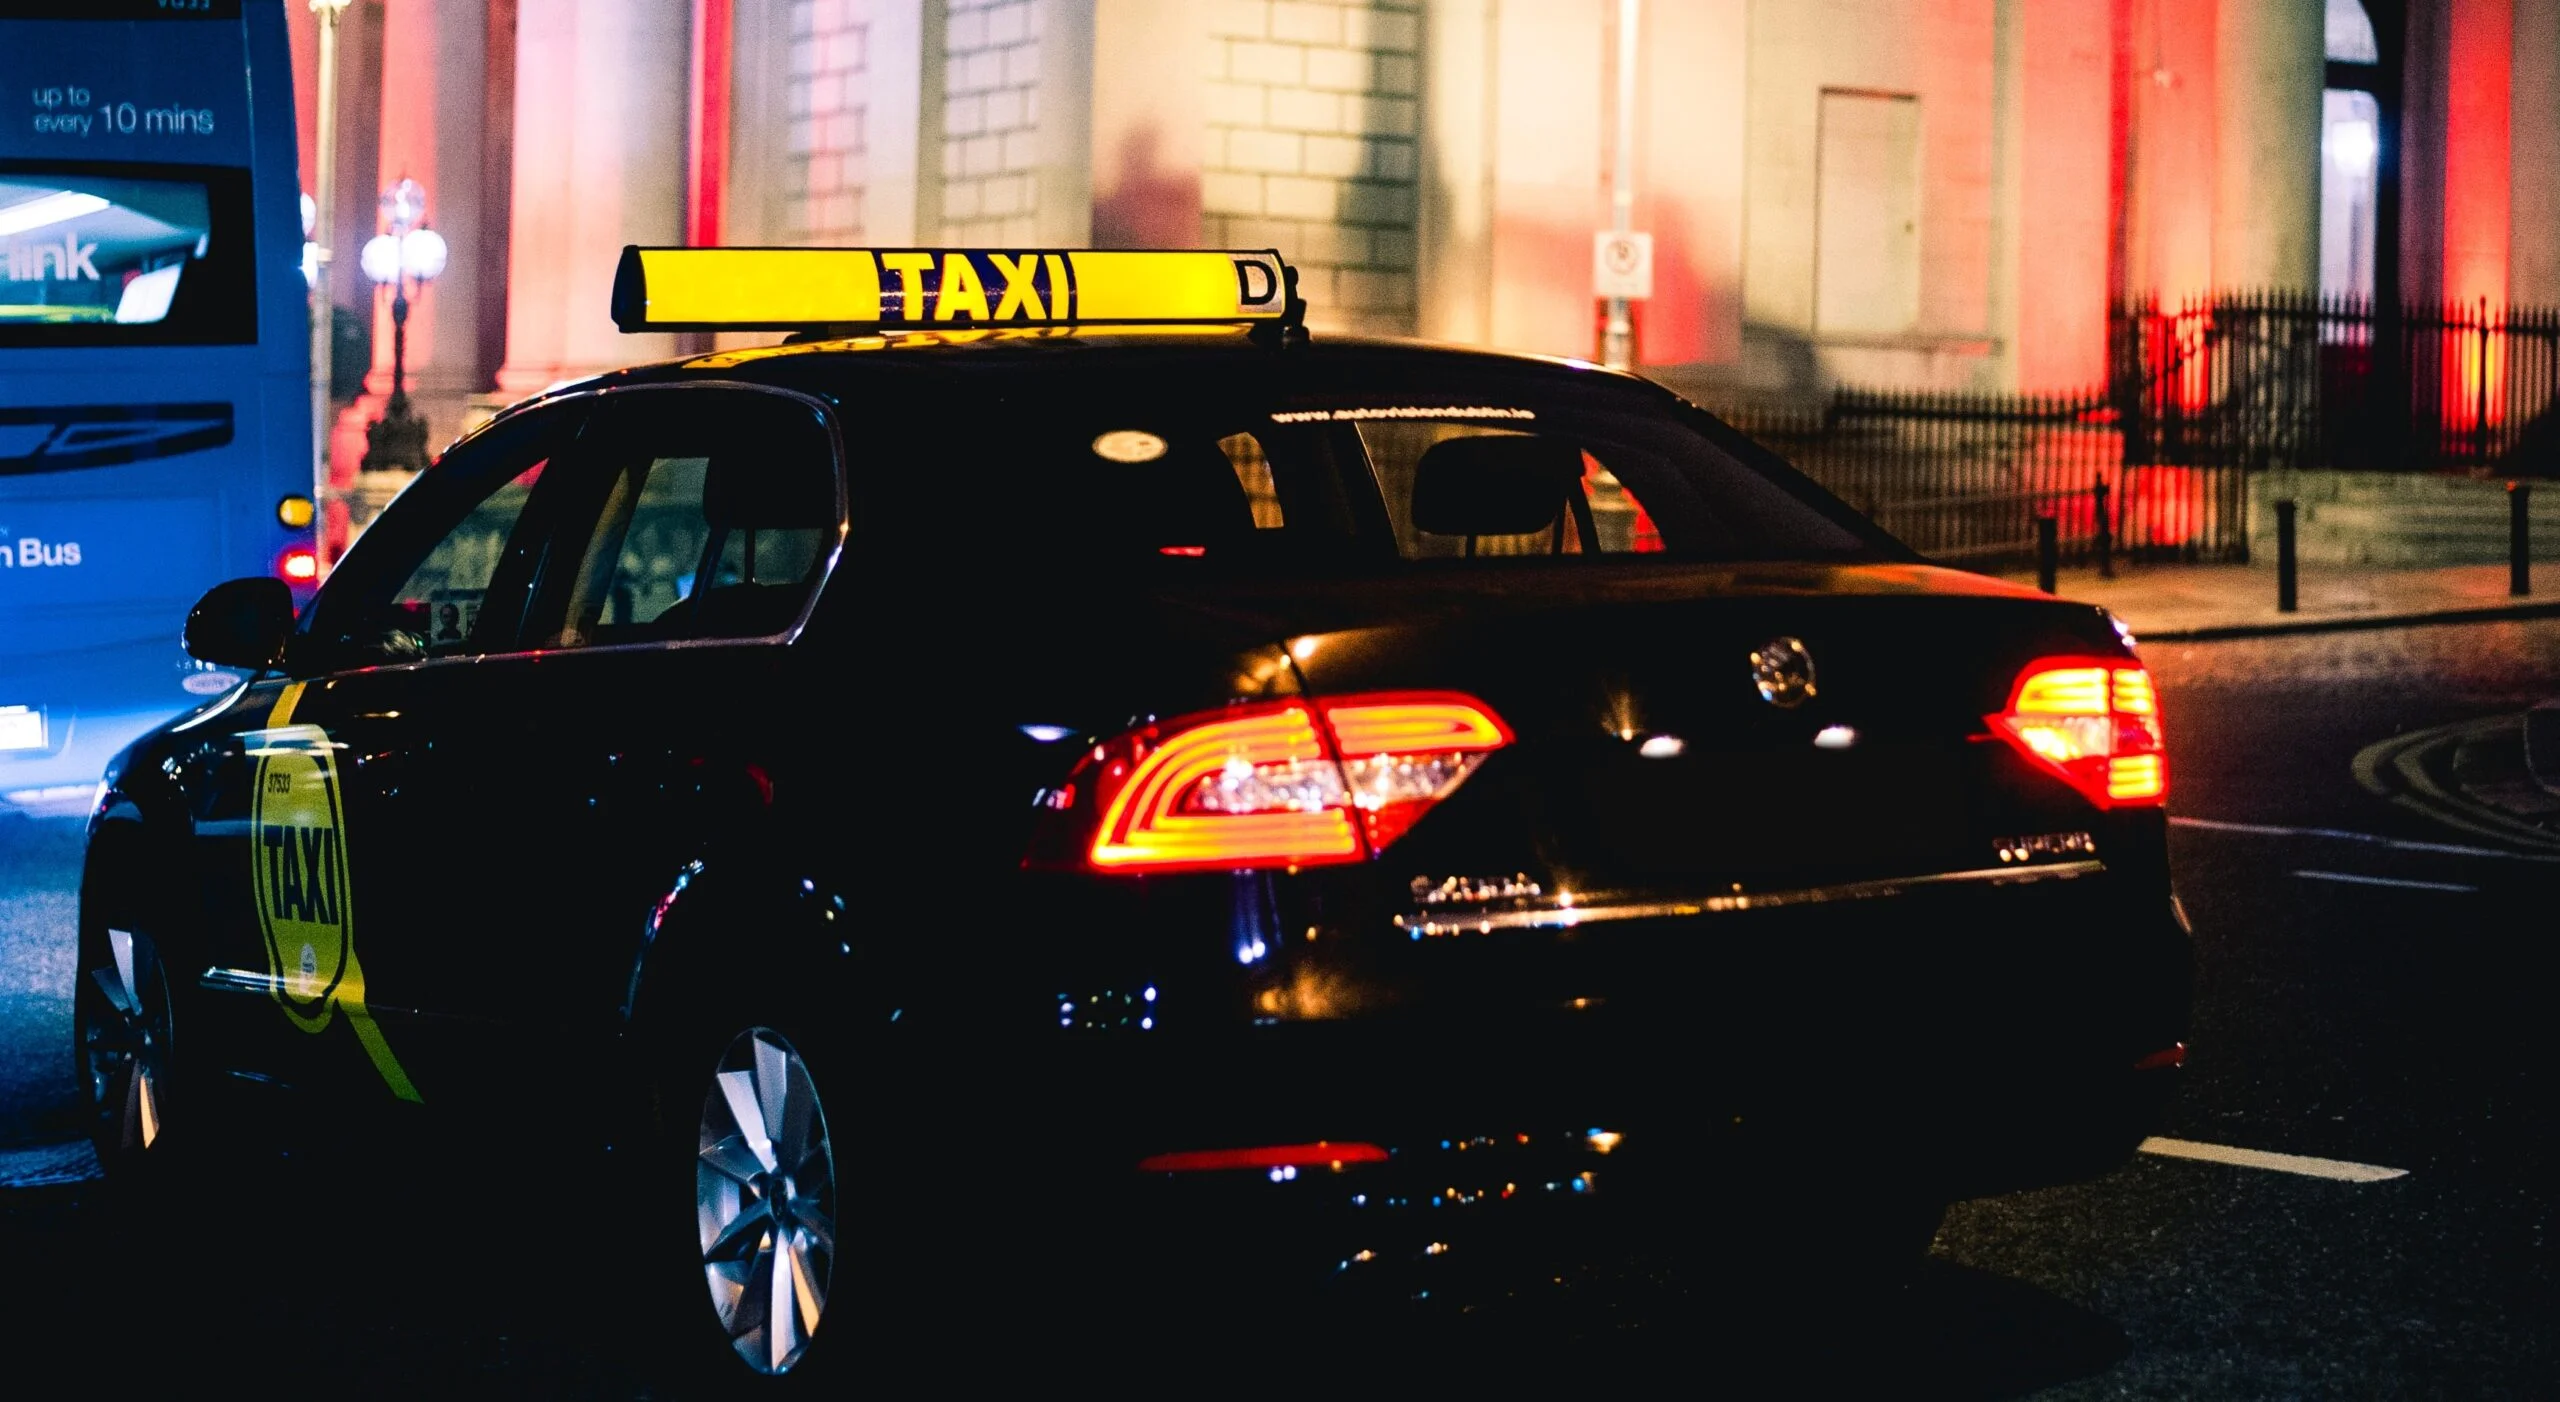 Why a Taxi driver was fined €300 in Dublin